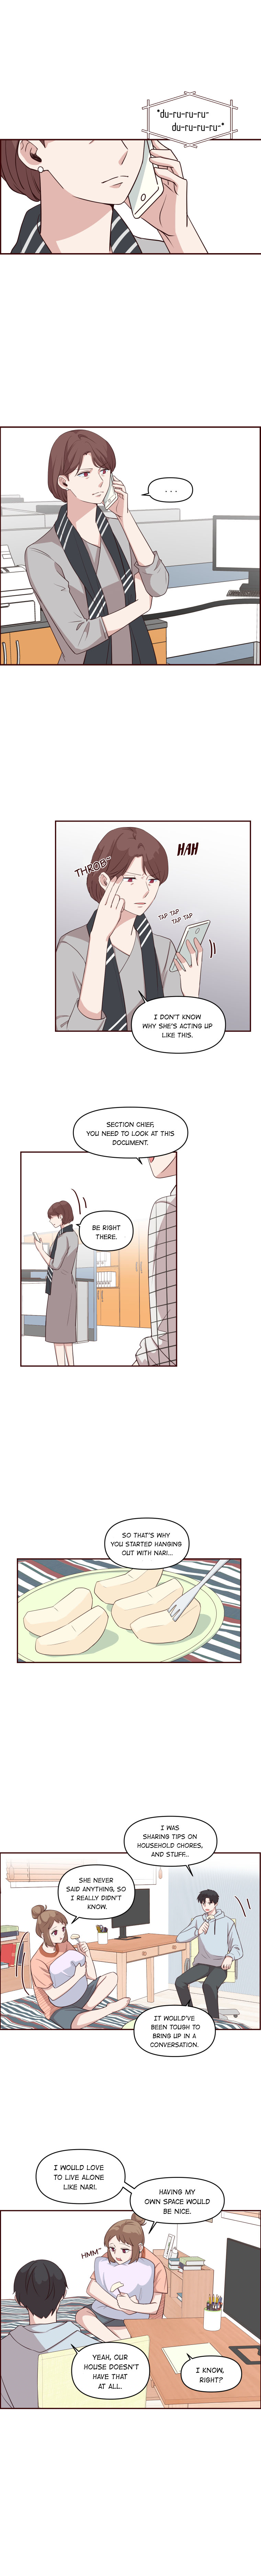 The Housewife Vol. 1 Ch. 27